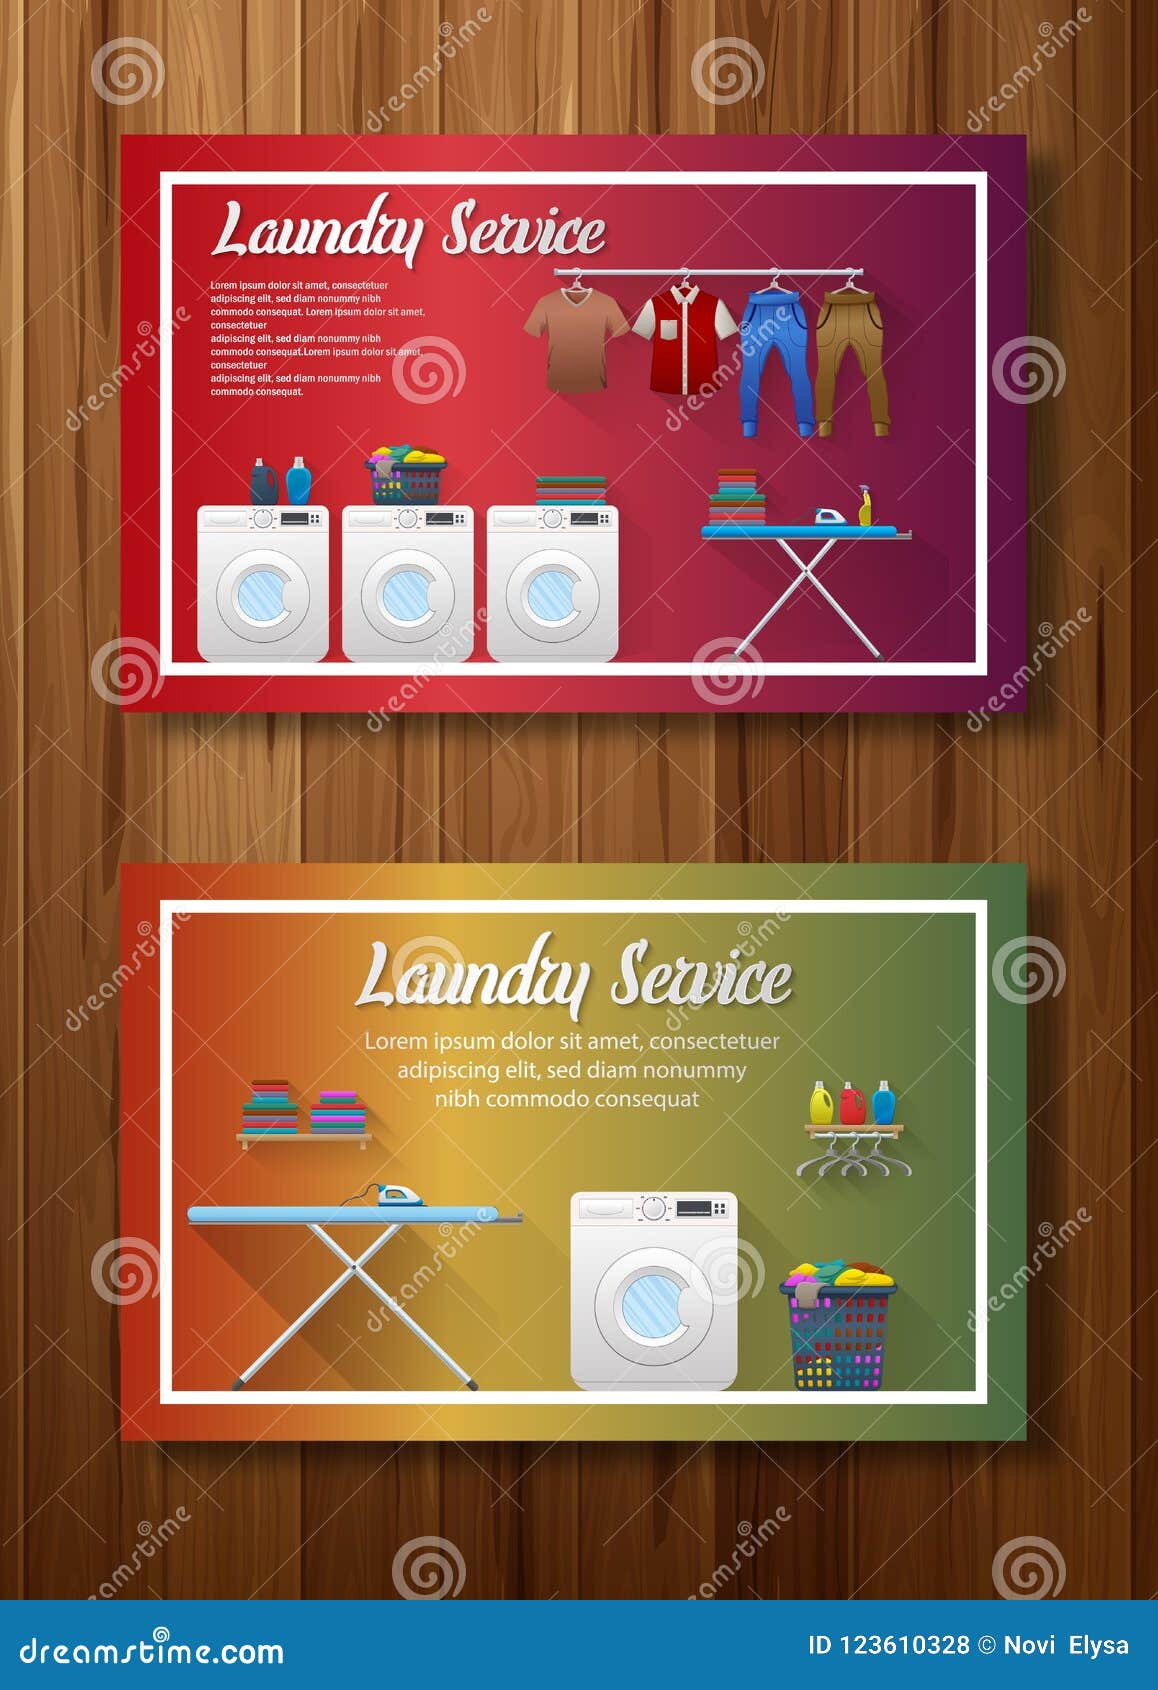 Laundry Service Banner Design On Board Wall Background ...